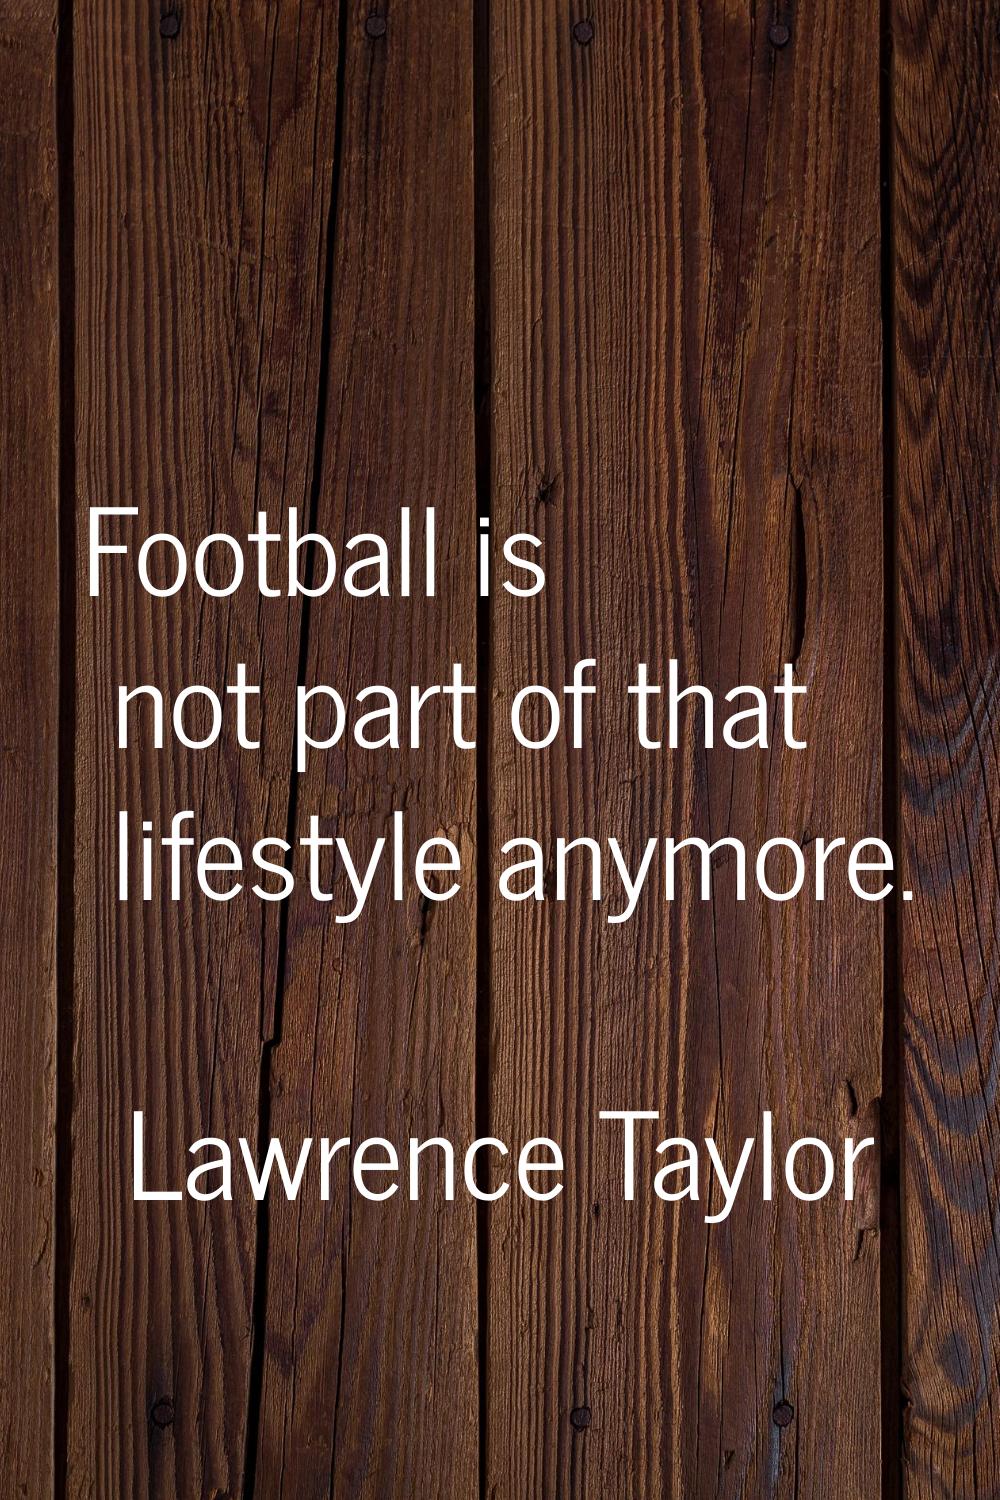 Football is not part of that lifestyle anymore.